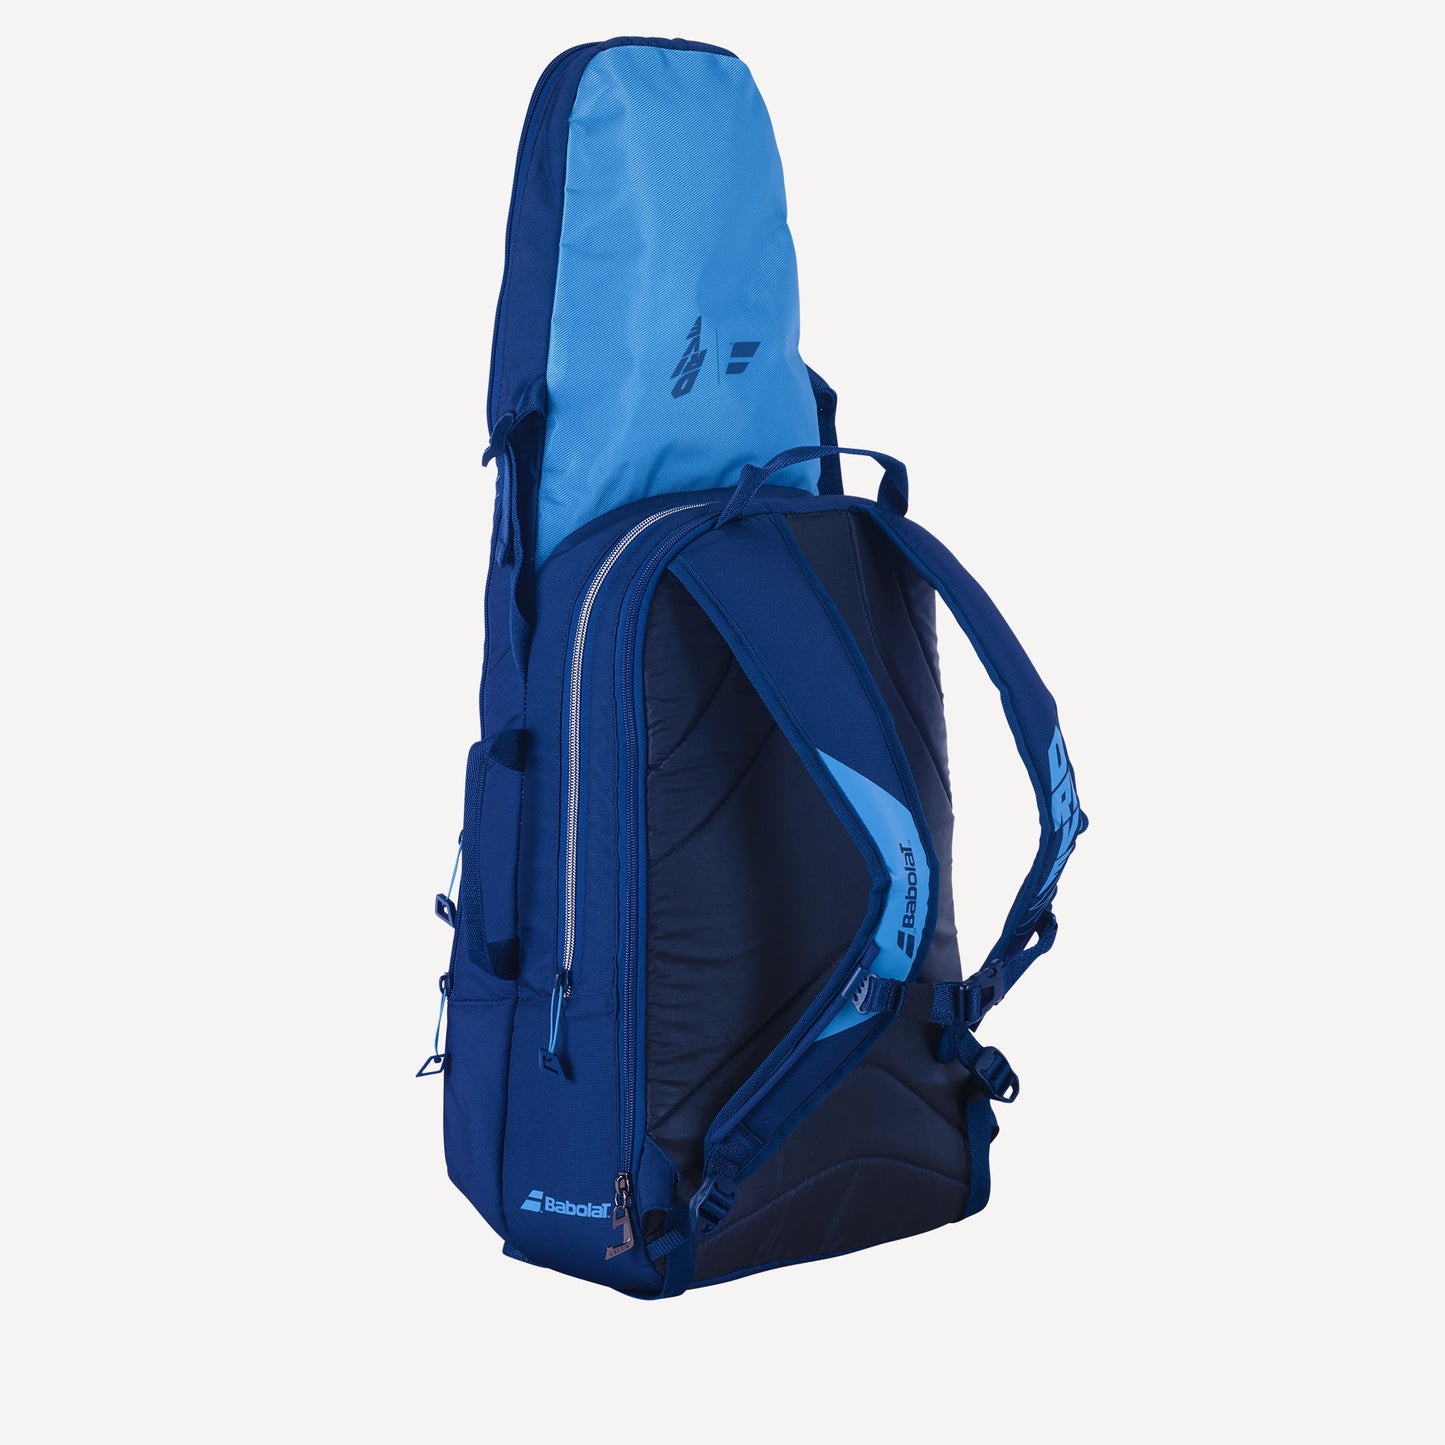 Babolat Pure Drive Tennis Backpack Blue (4)